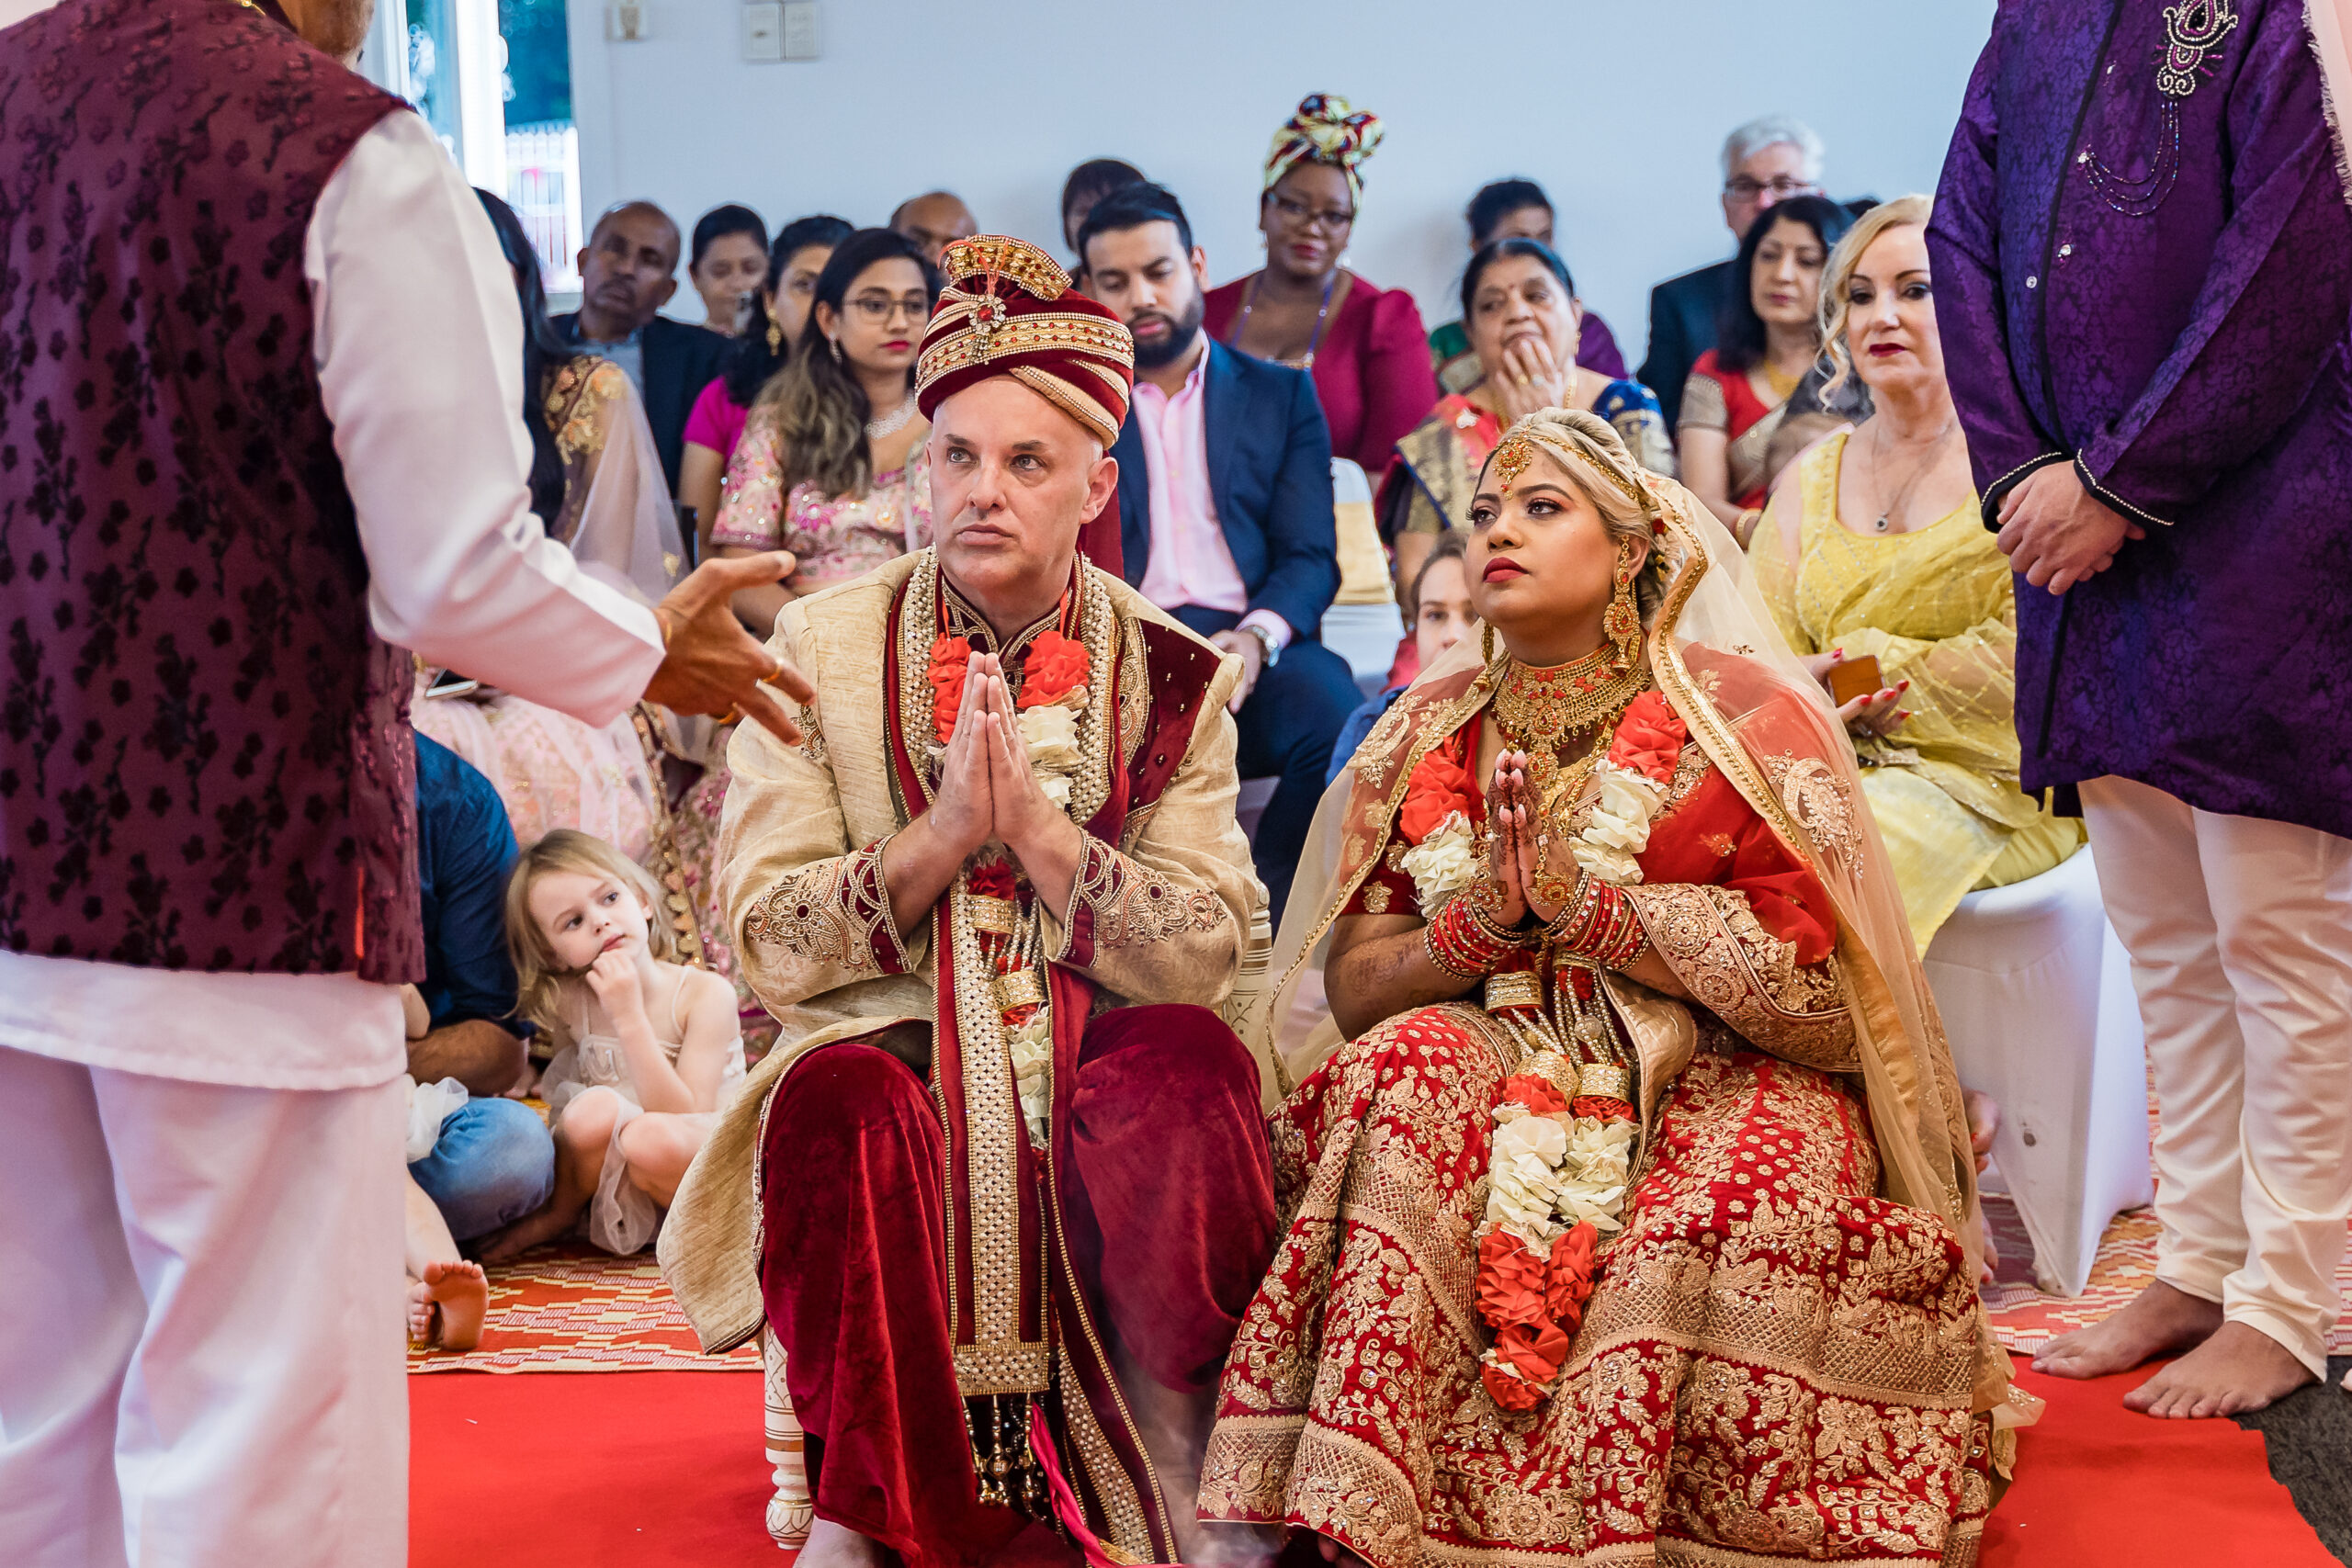 Cultural wedding photography by Crafted Weddings